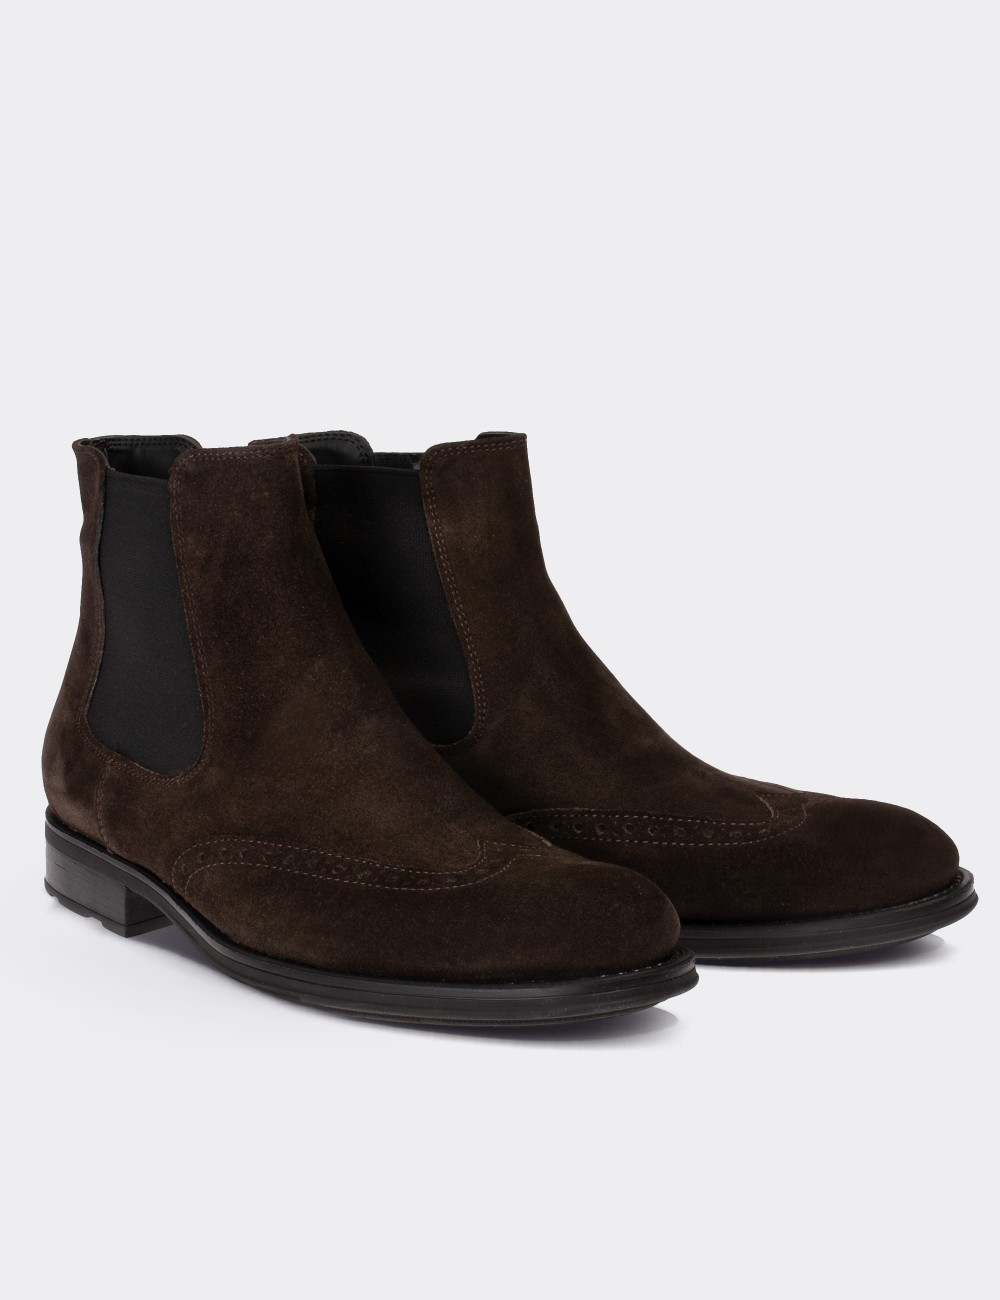 Brown Suede Leather Chelsea Boots - 01622MKHVC05